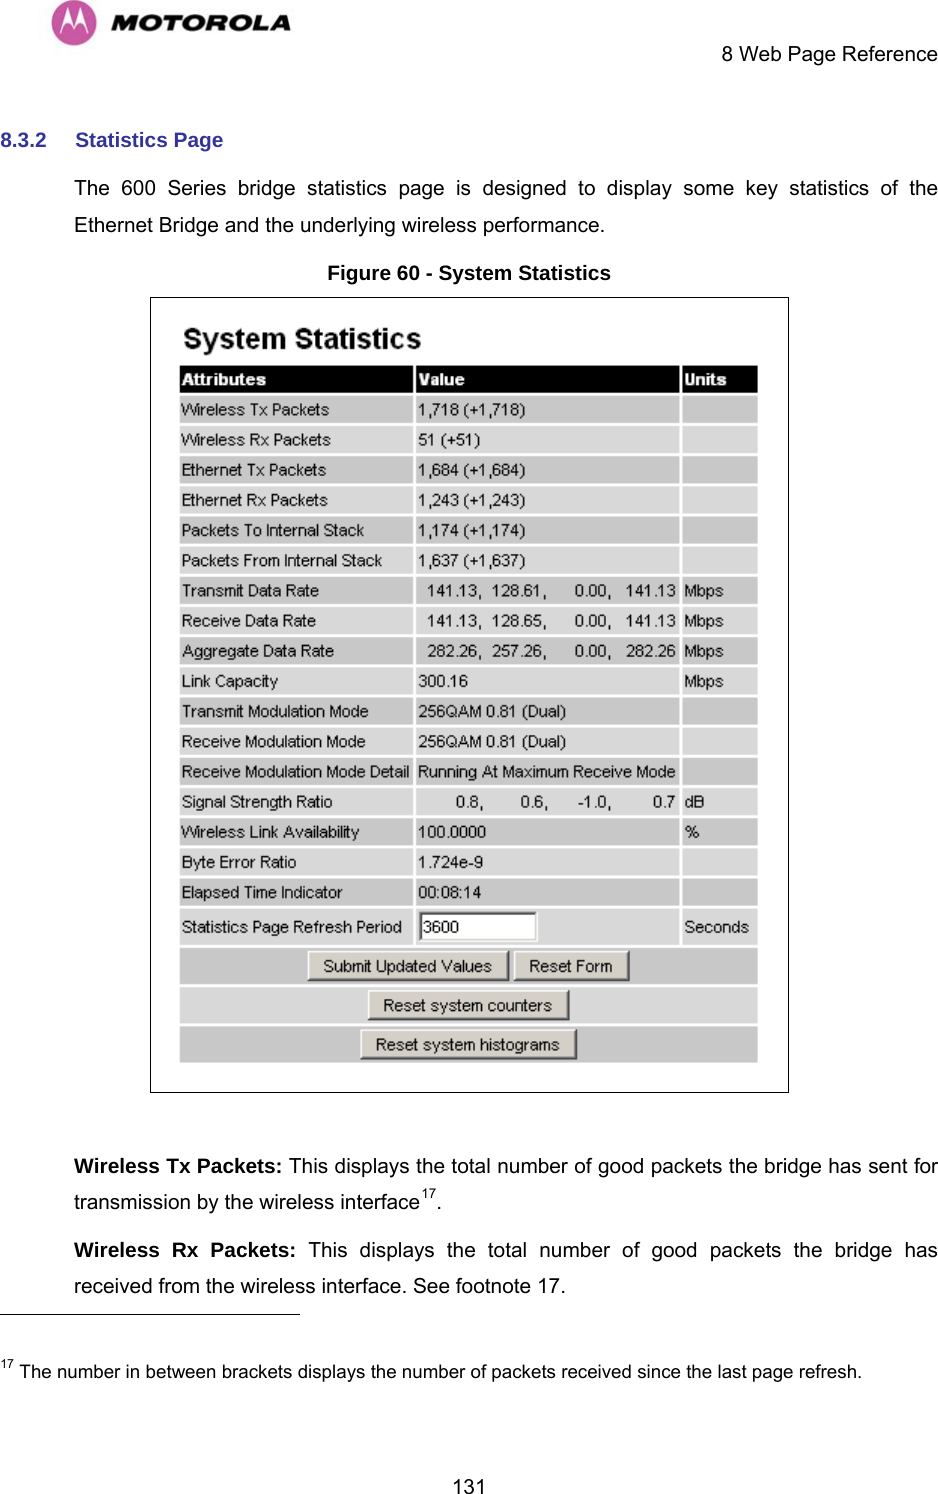     8 Web Page Reference  1318.3.2  Statistics Page  The 600 Series bridge statistics page is designed to display some key statistics of the Ethernet Bridge and the underlying wireless performance.  Figure 60 - System Statistics   Wireless Tx Packets: This displays the total number of good packets the bridge has sent for transmission by the wireless interface17. Wireless Rx Packets: This displays the total number of good packets the bridge has received from the wireless interface. See footnote 17.                                                       17 The number in between brackets displays the number of packets received since the last page refresh. 